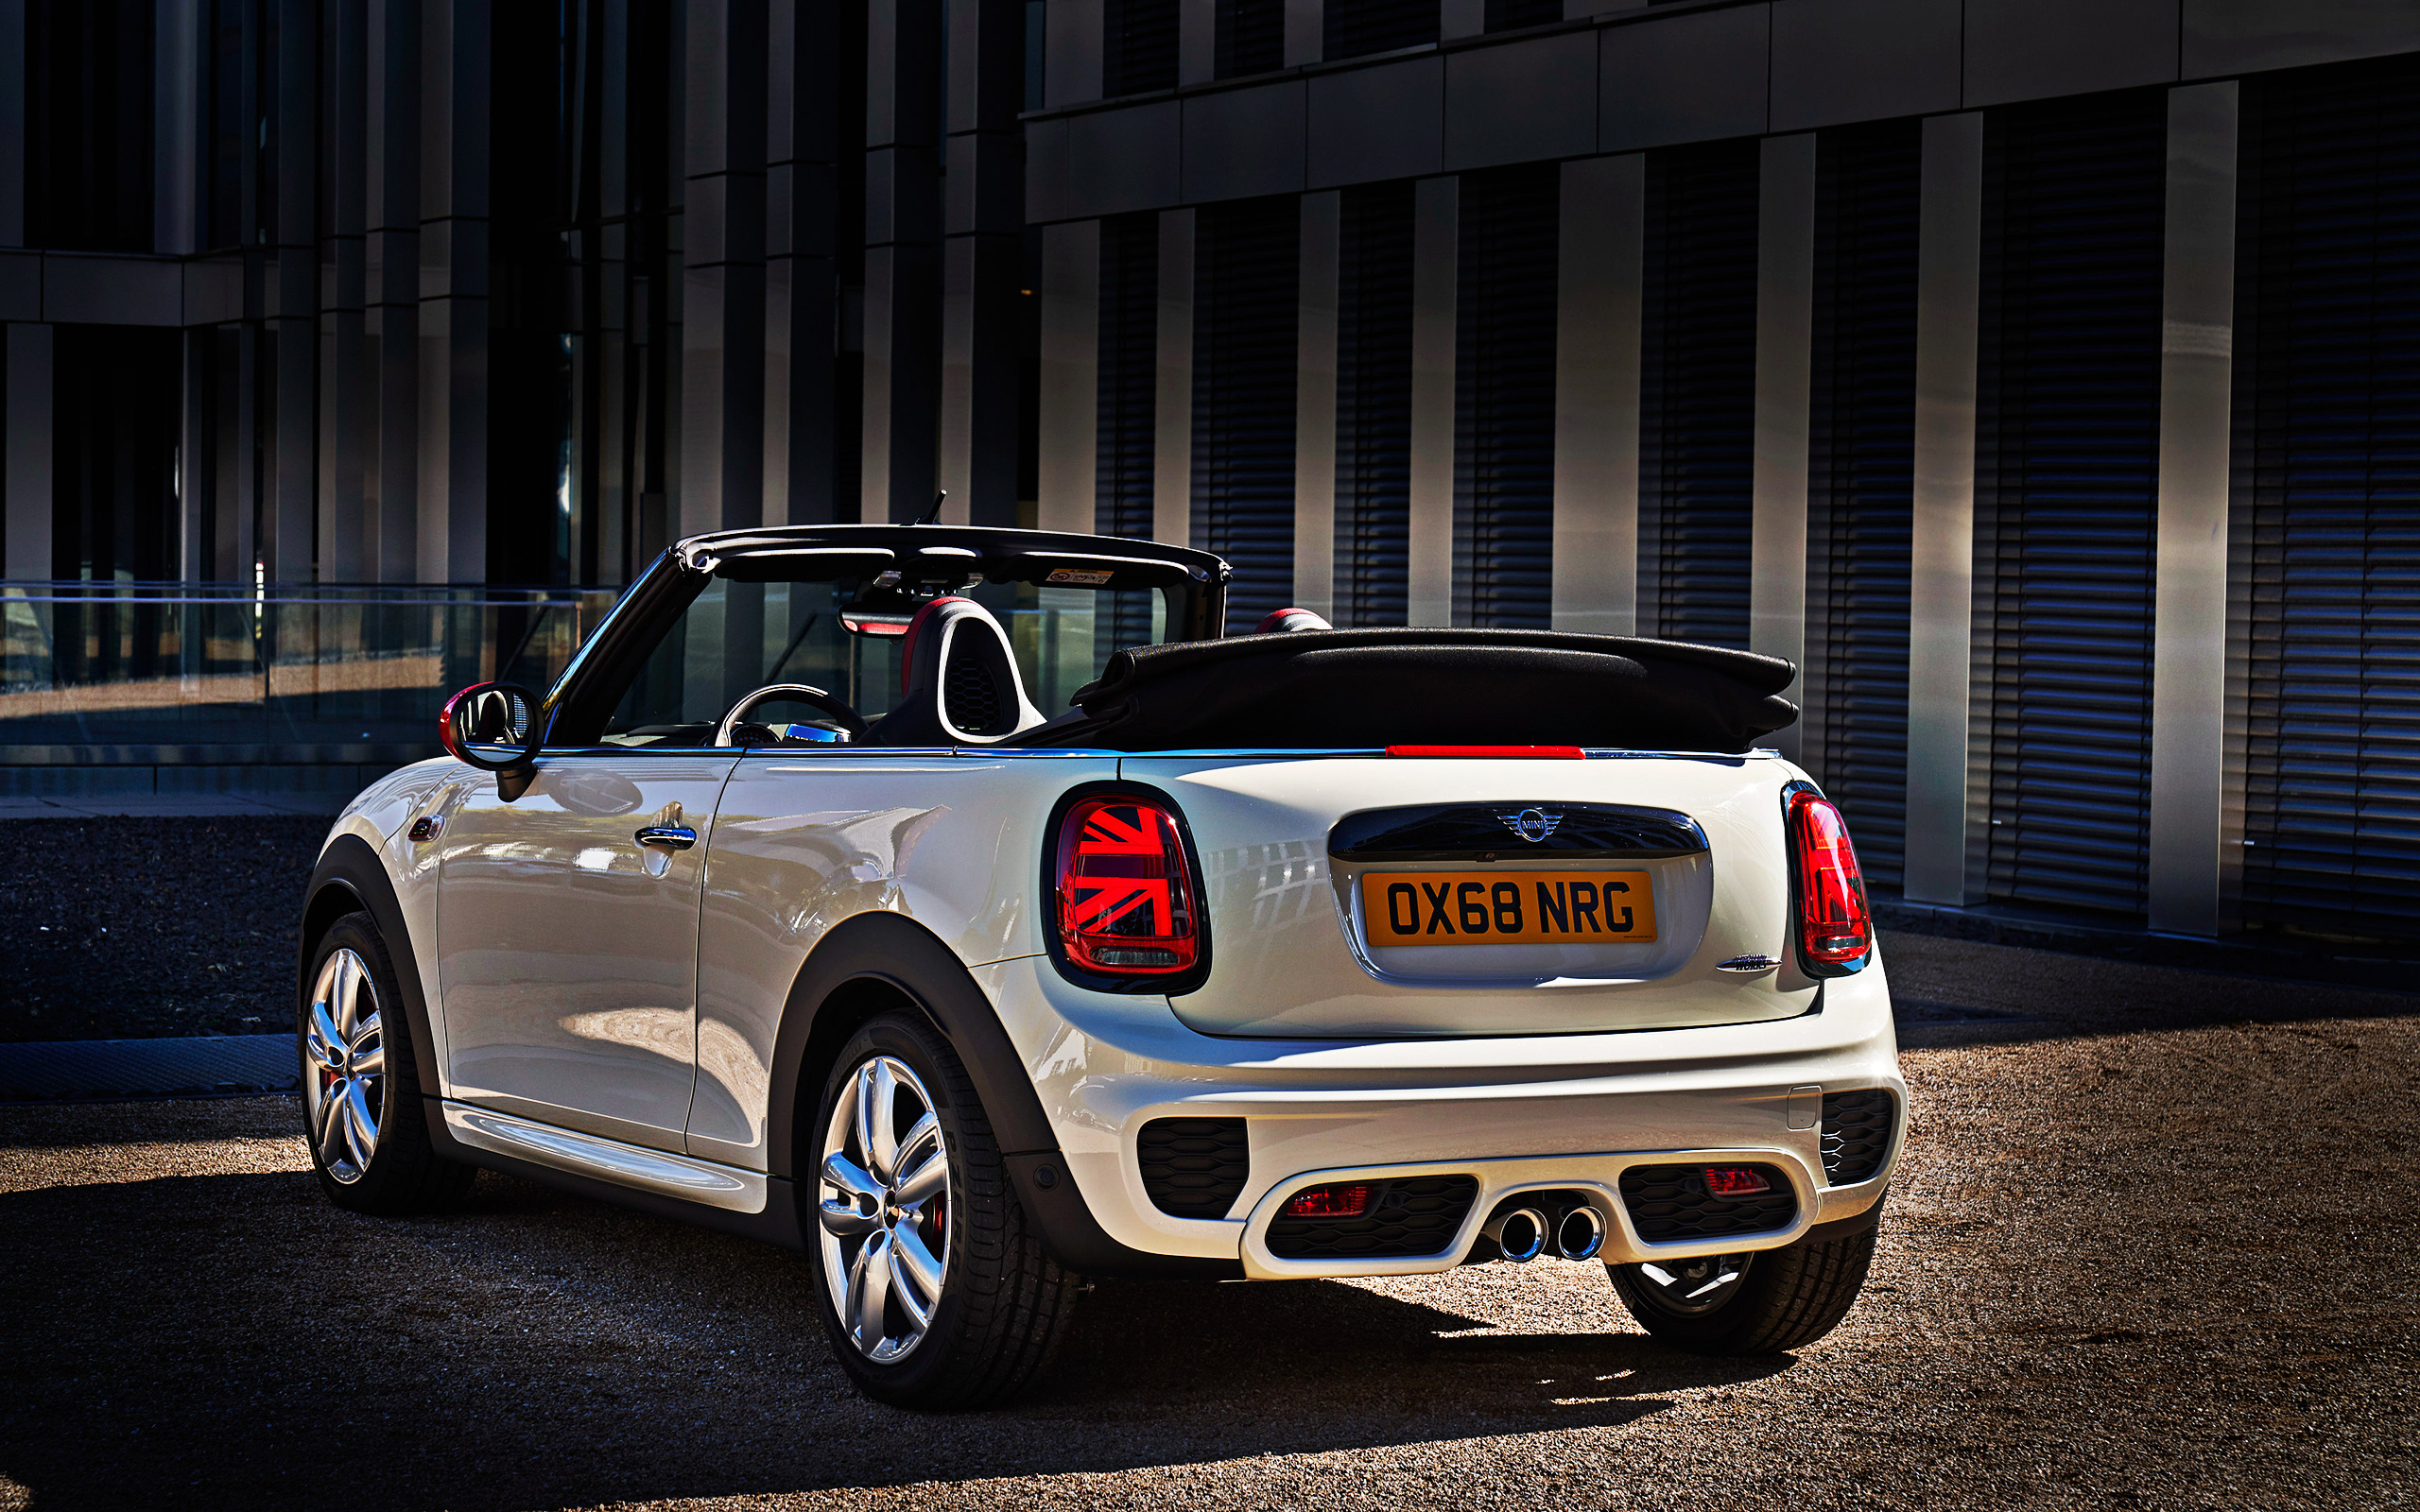 MINI Convertible, Iconic British charm, White cabriolet, High-quality pictures, 2560x1600 HD Desktop